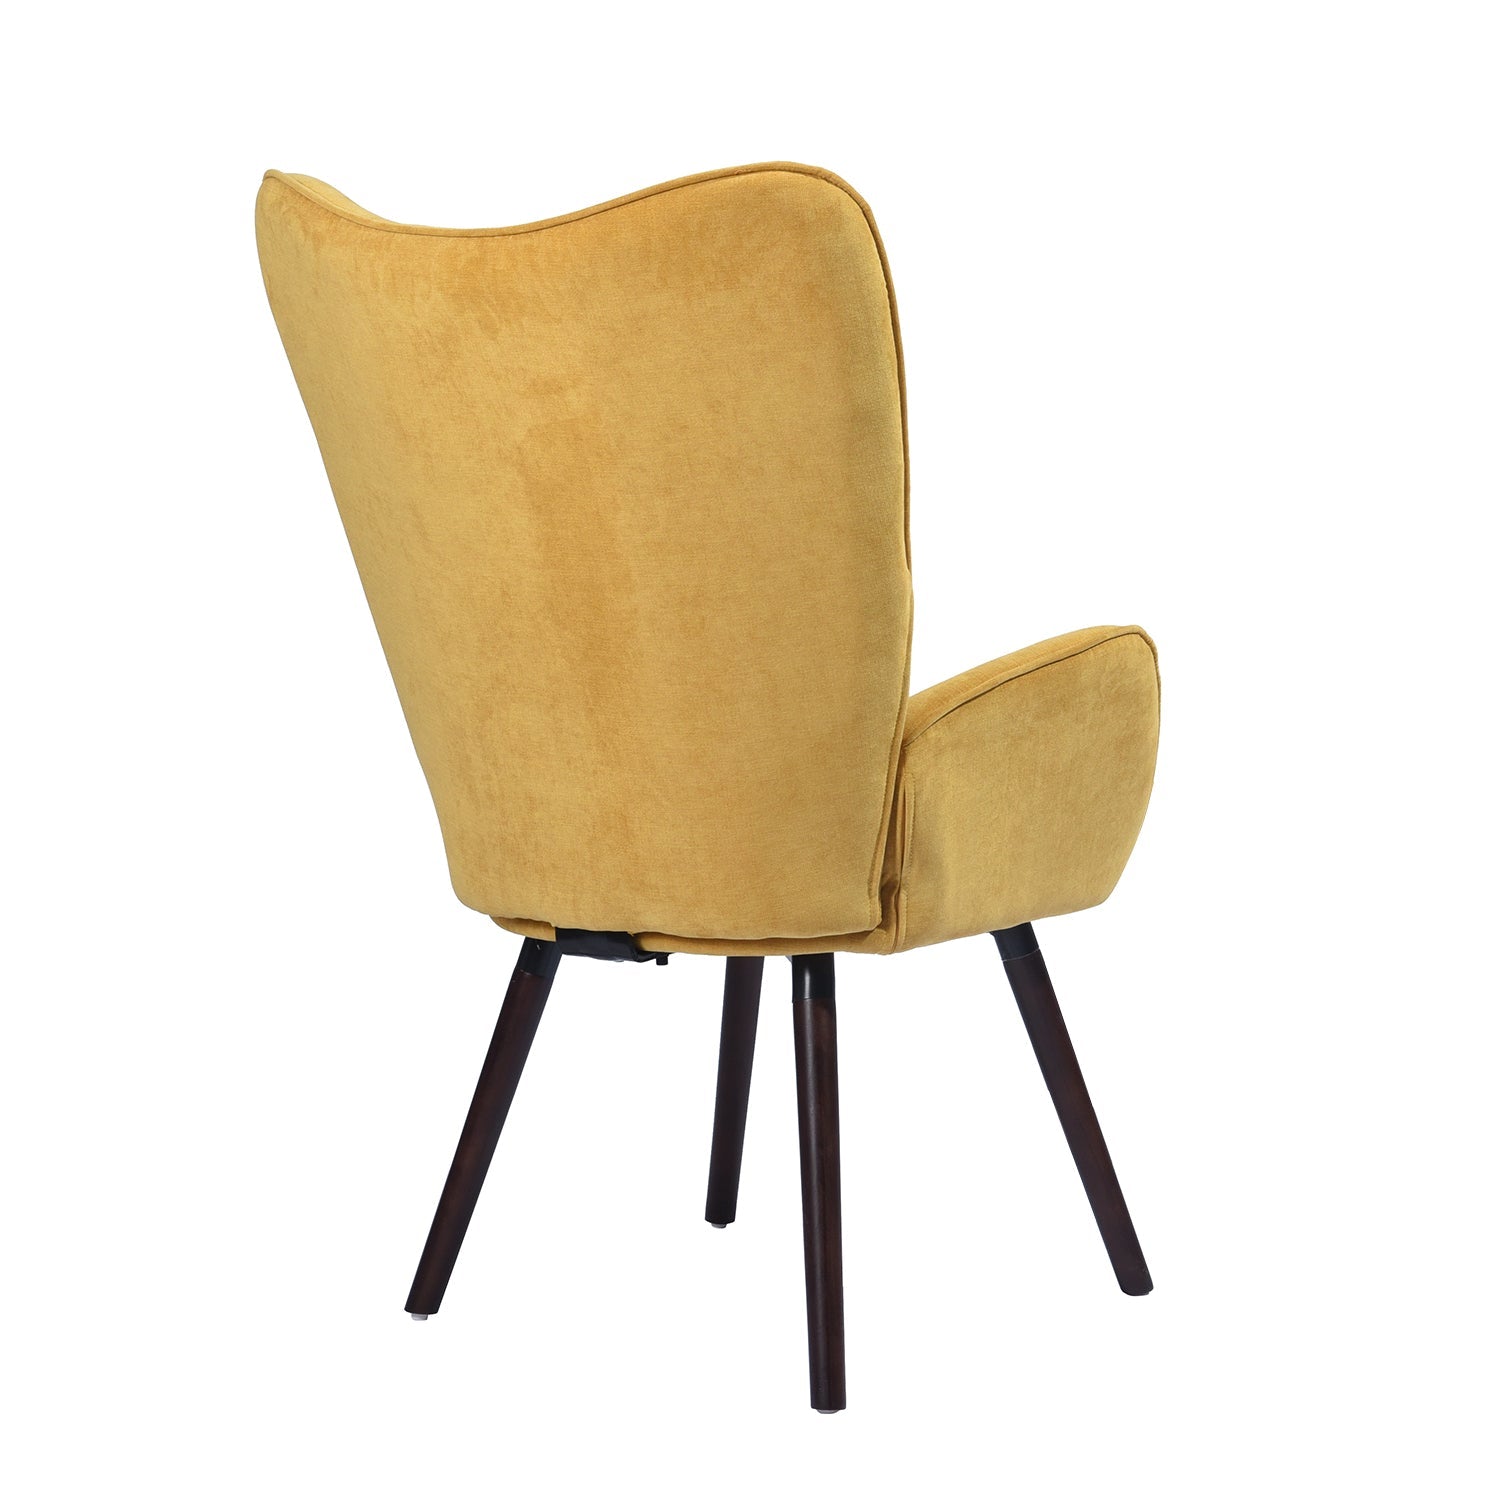 Kas Kd  Accent Chair